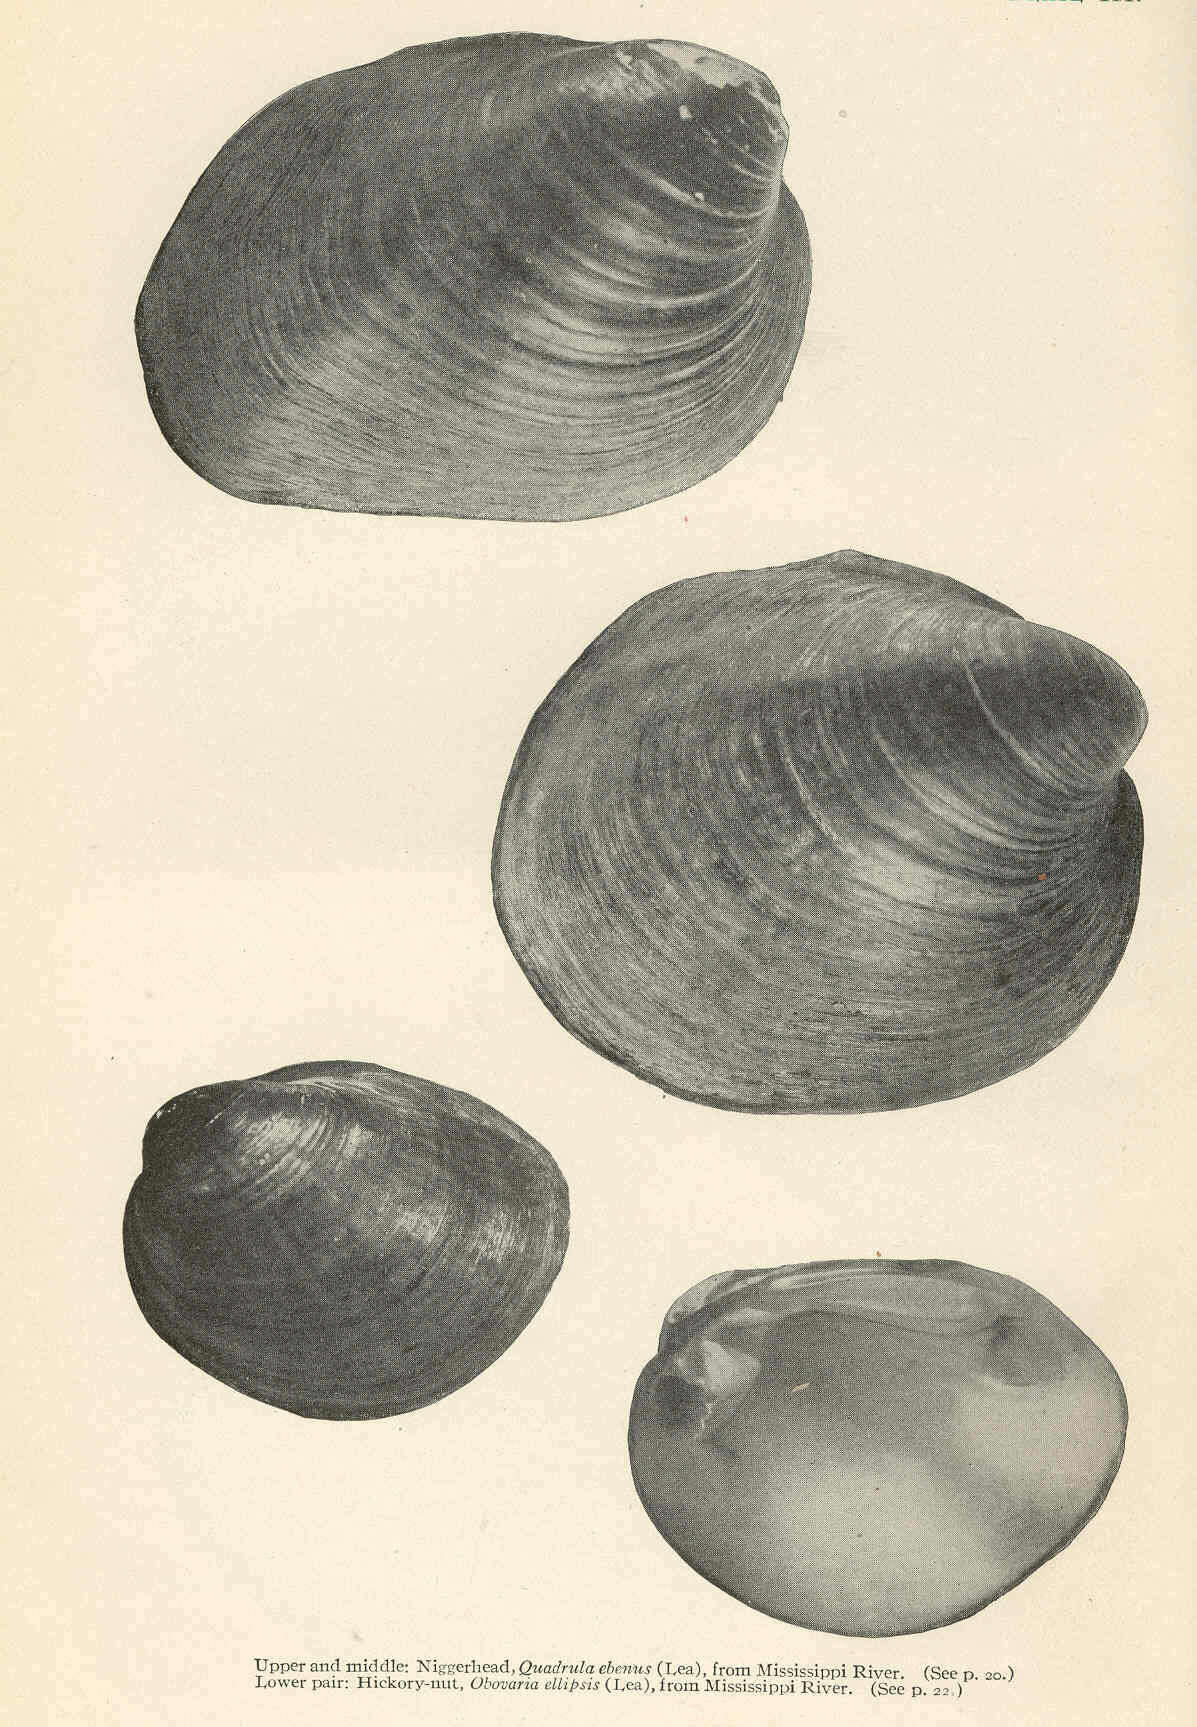 Image of unionid freshwater mussels